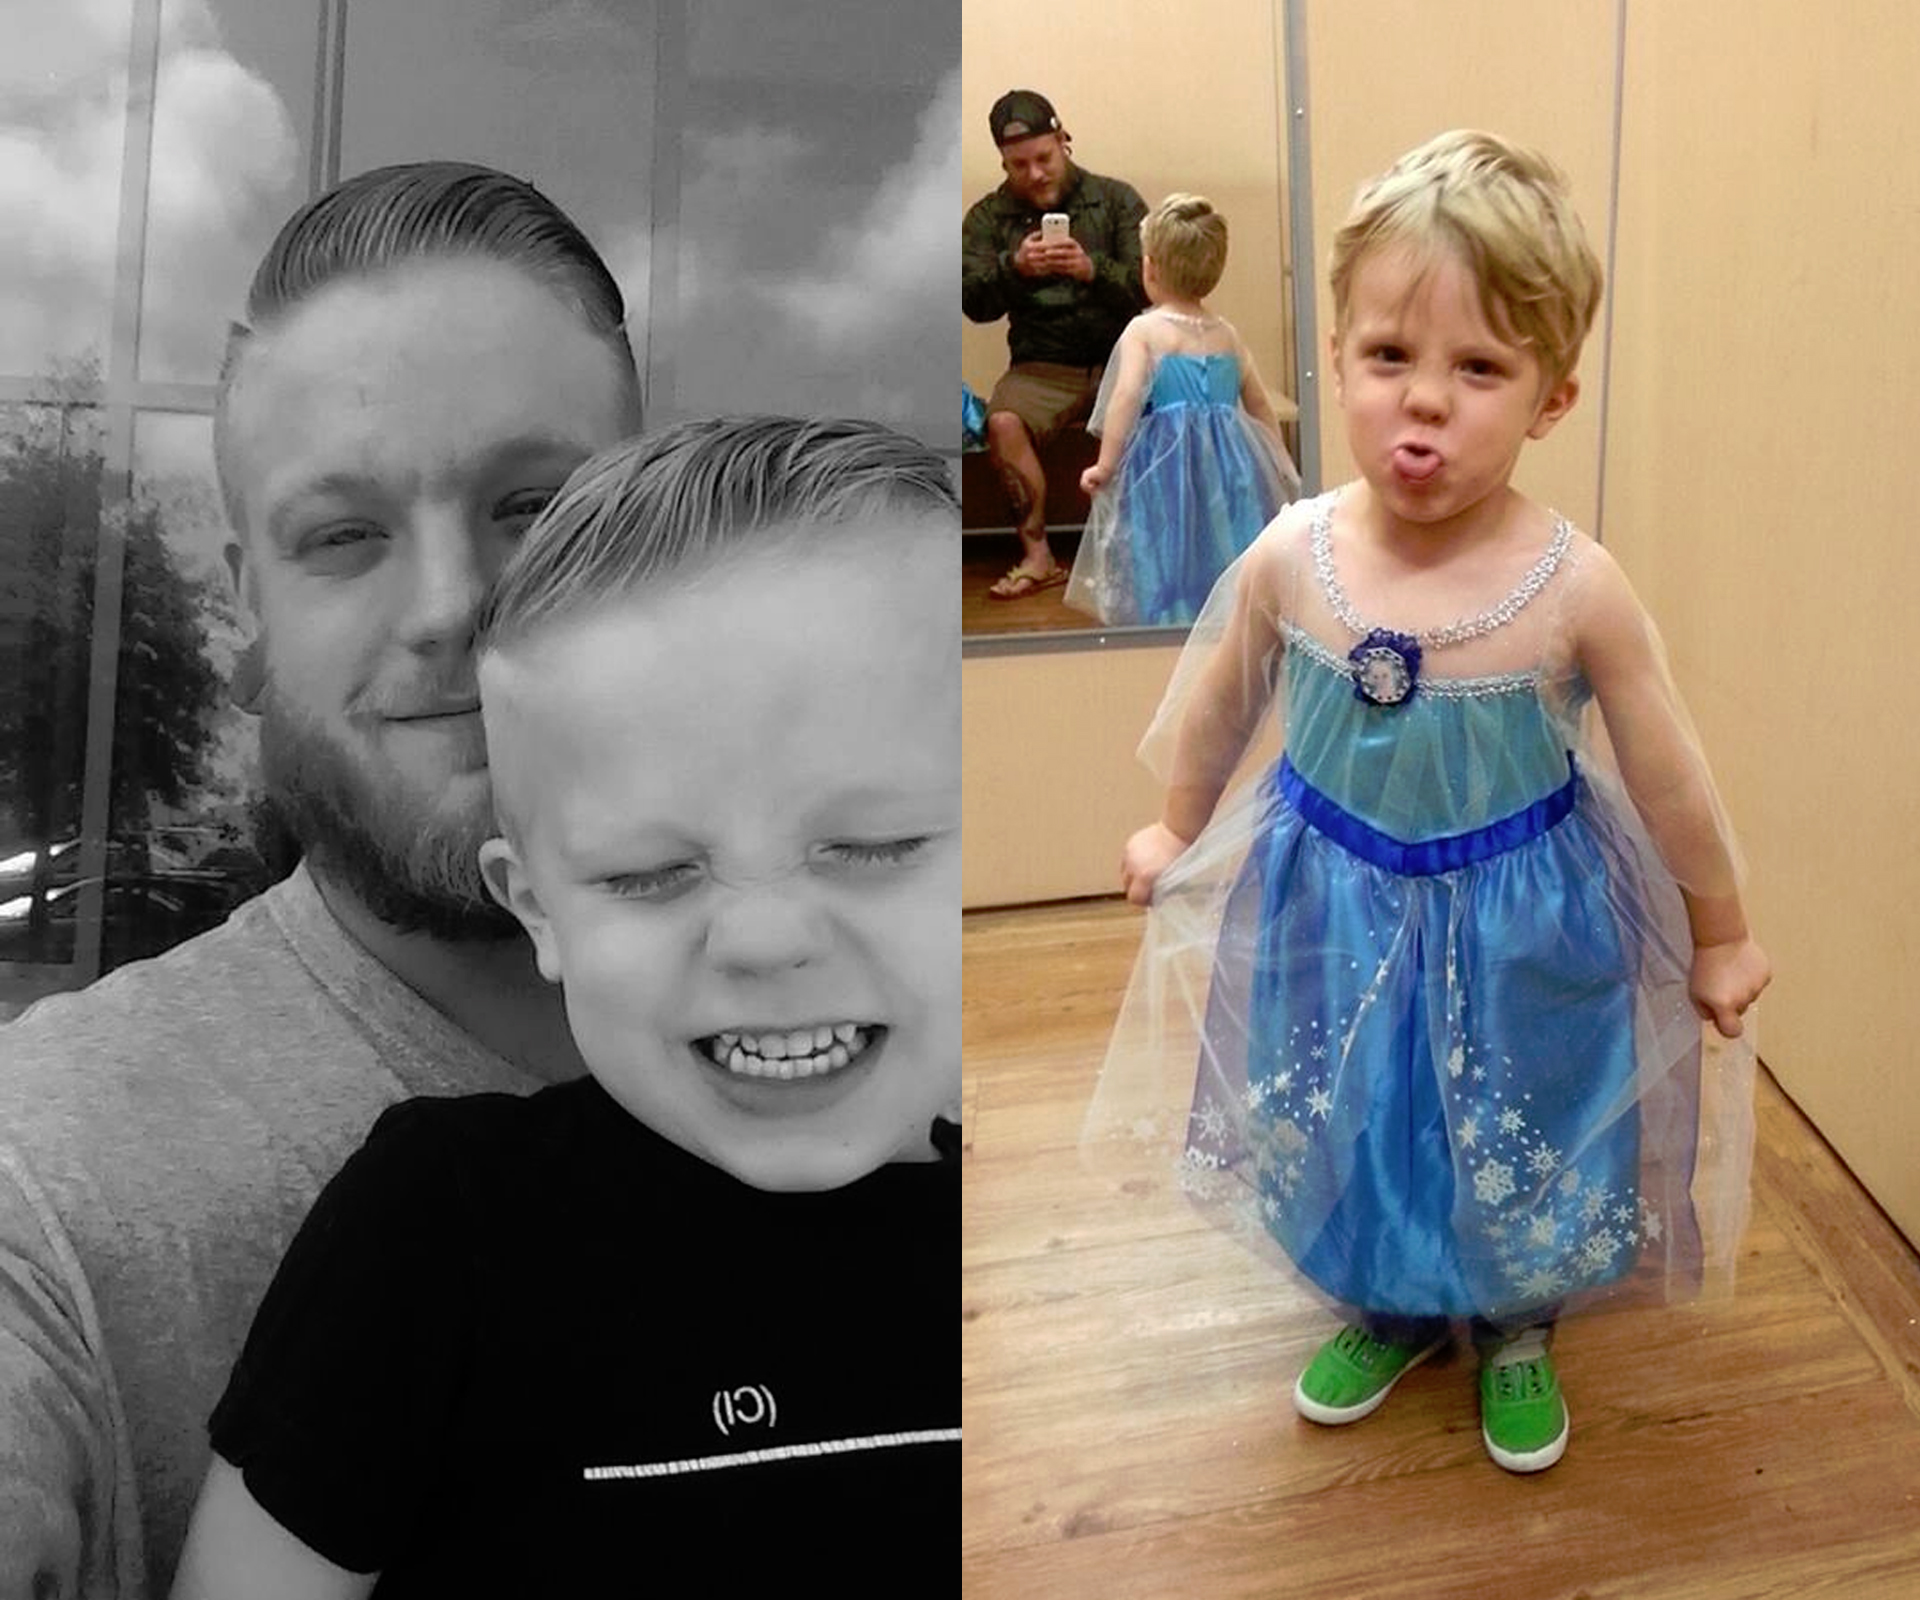 Dad’s awesome response to his son’s Elsa costume goes viral